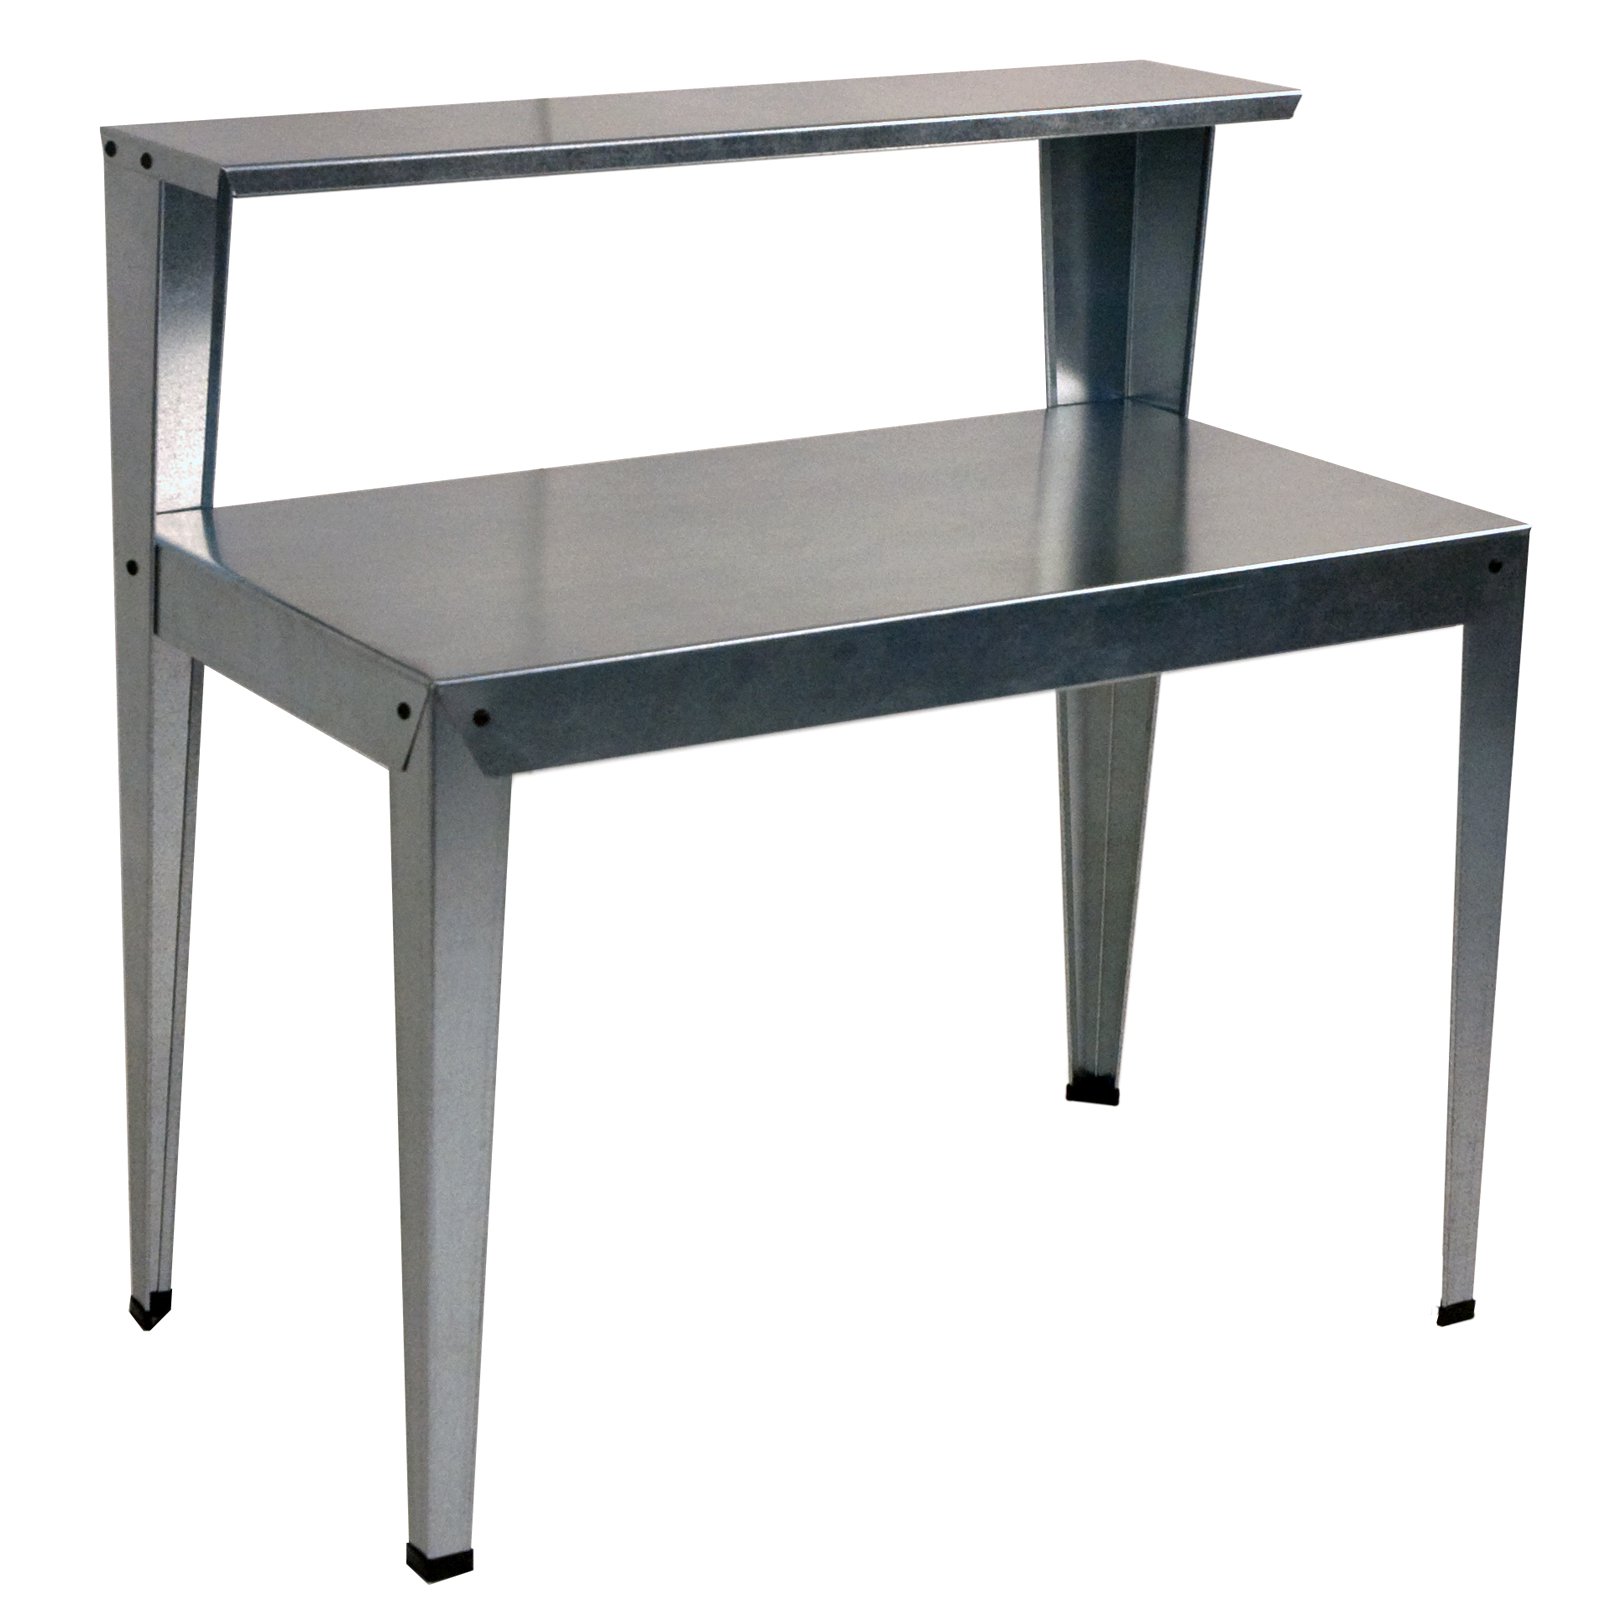 Poly-Tex 2-Tier Galvanized Steel Potting Bench - image 1 of 2